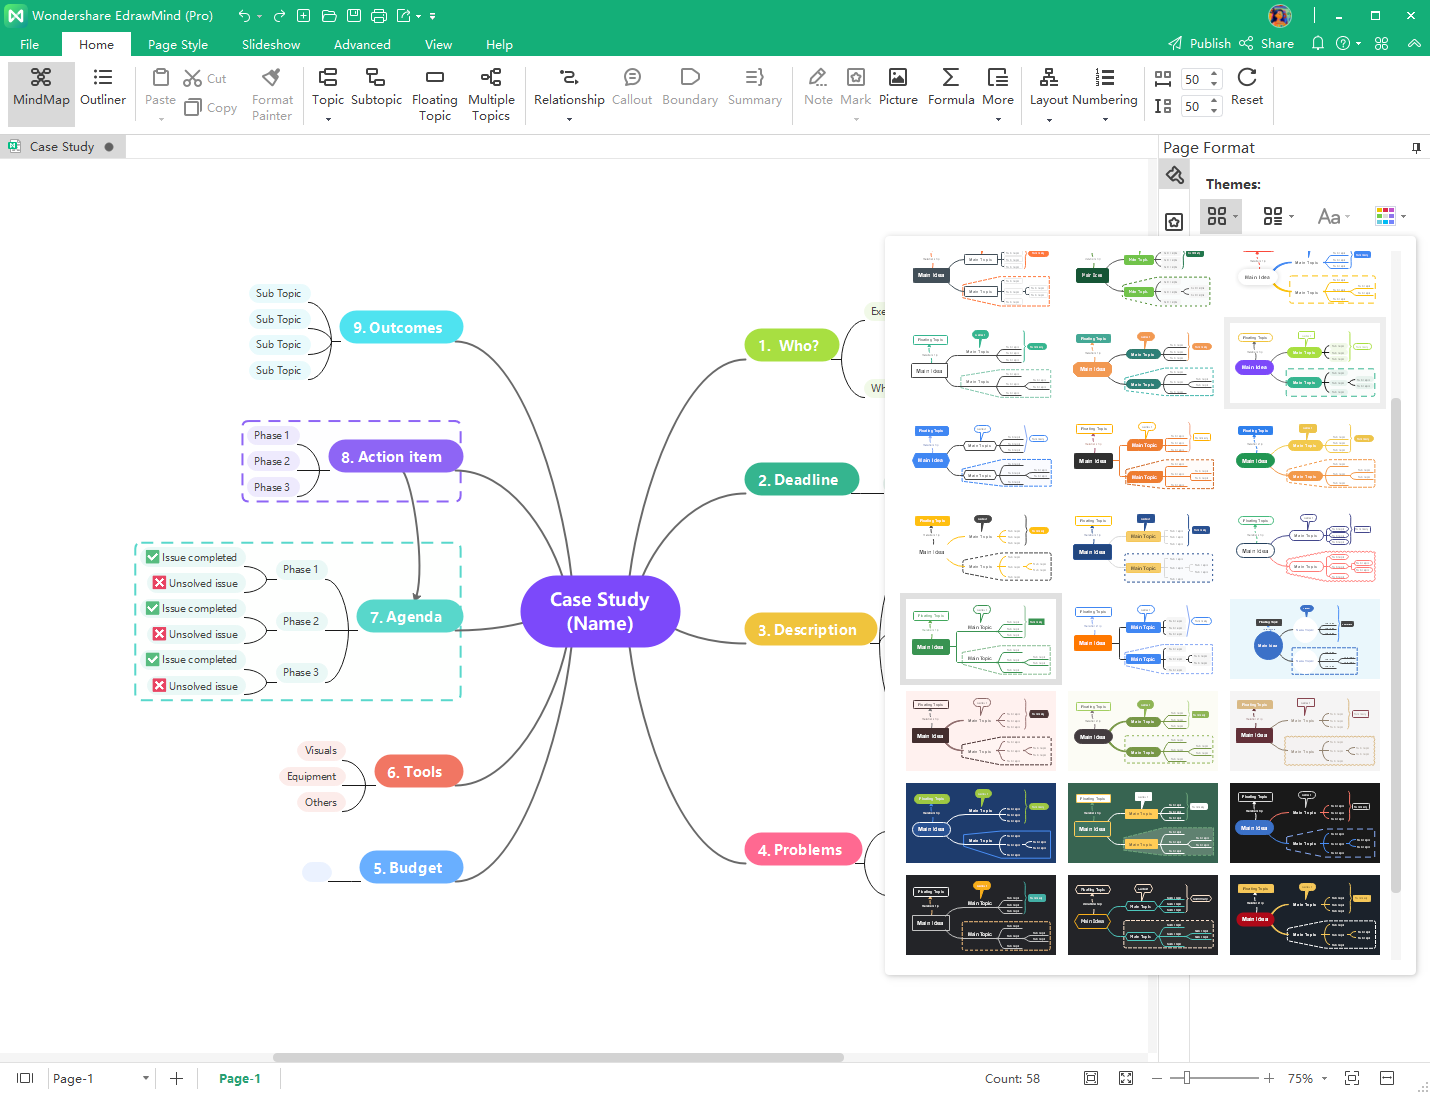 free mind mapping software for windows 10